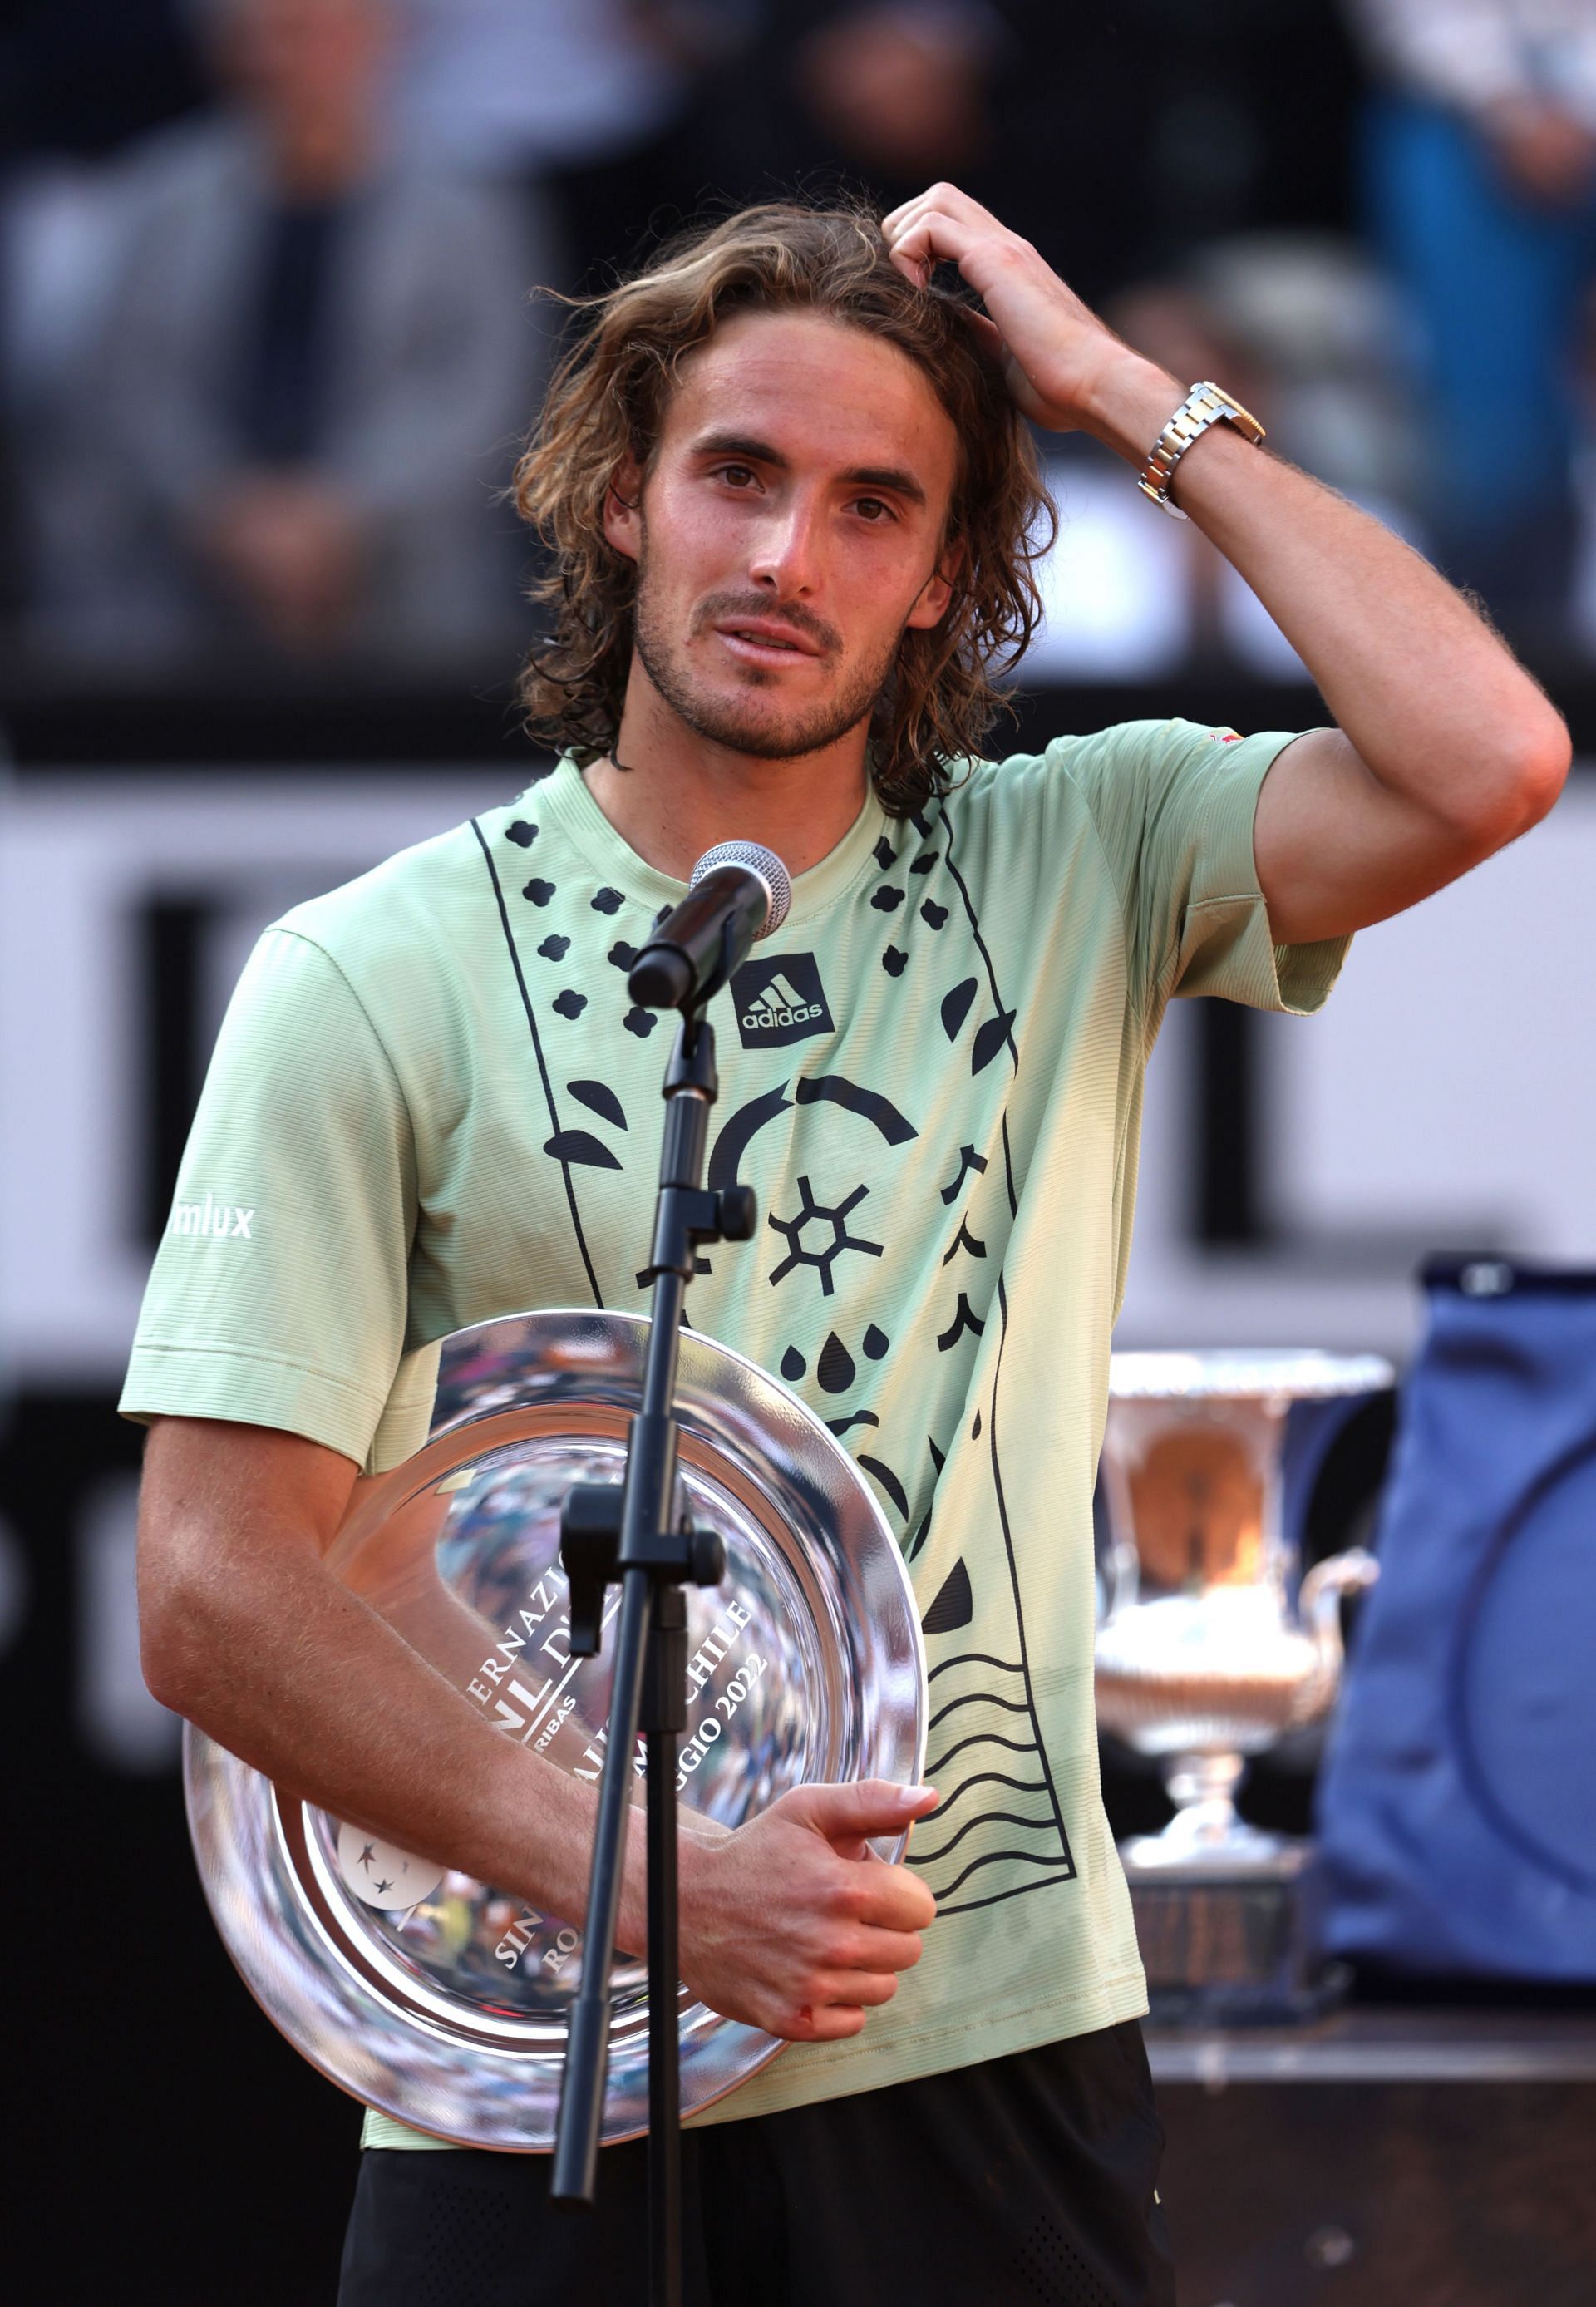 Stefanos Tsitsipas is the favorite from the third quarter of the draw